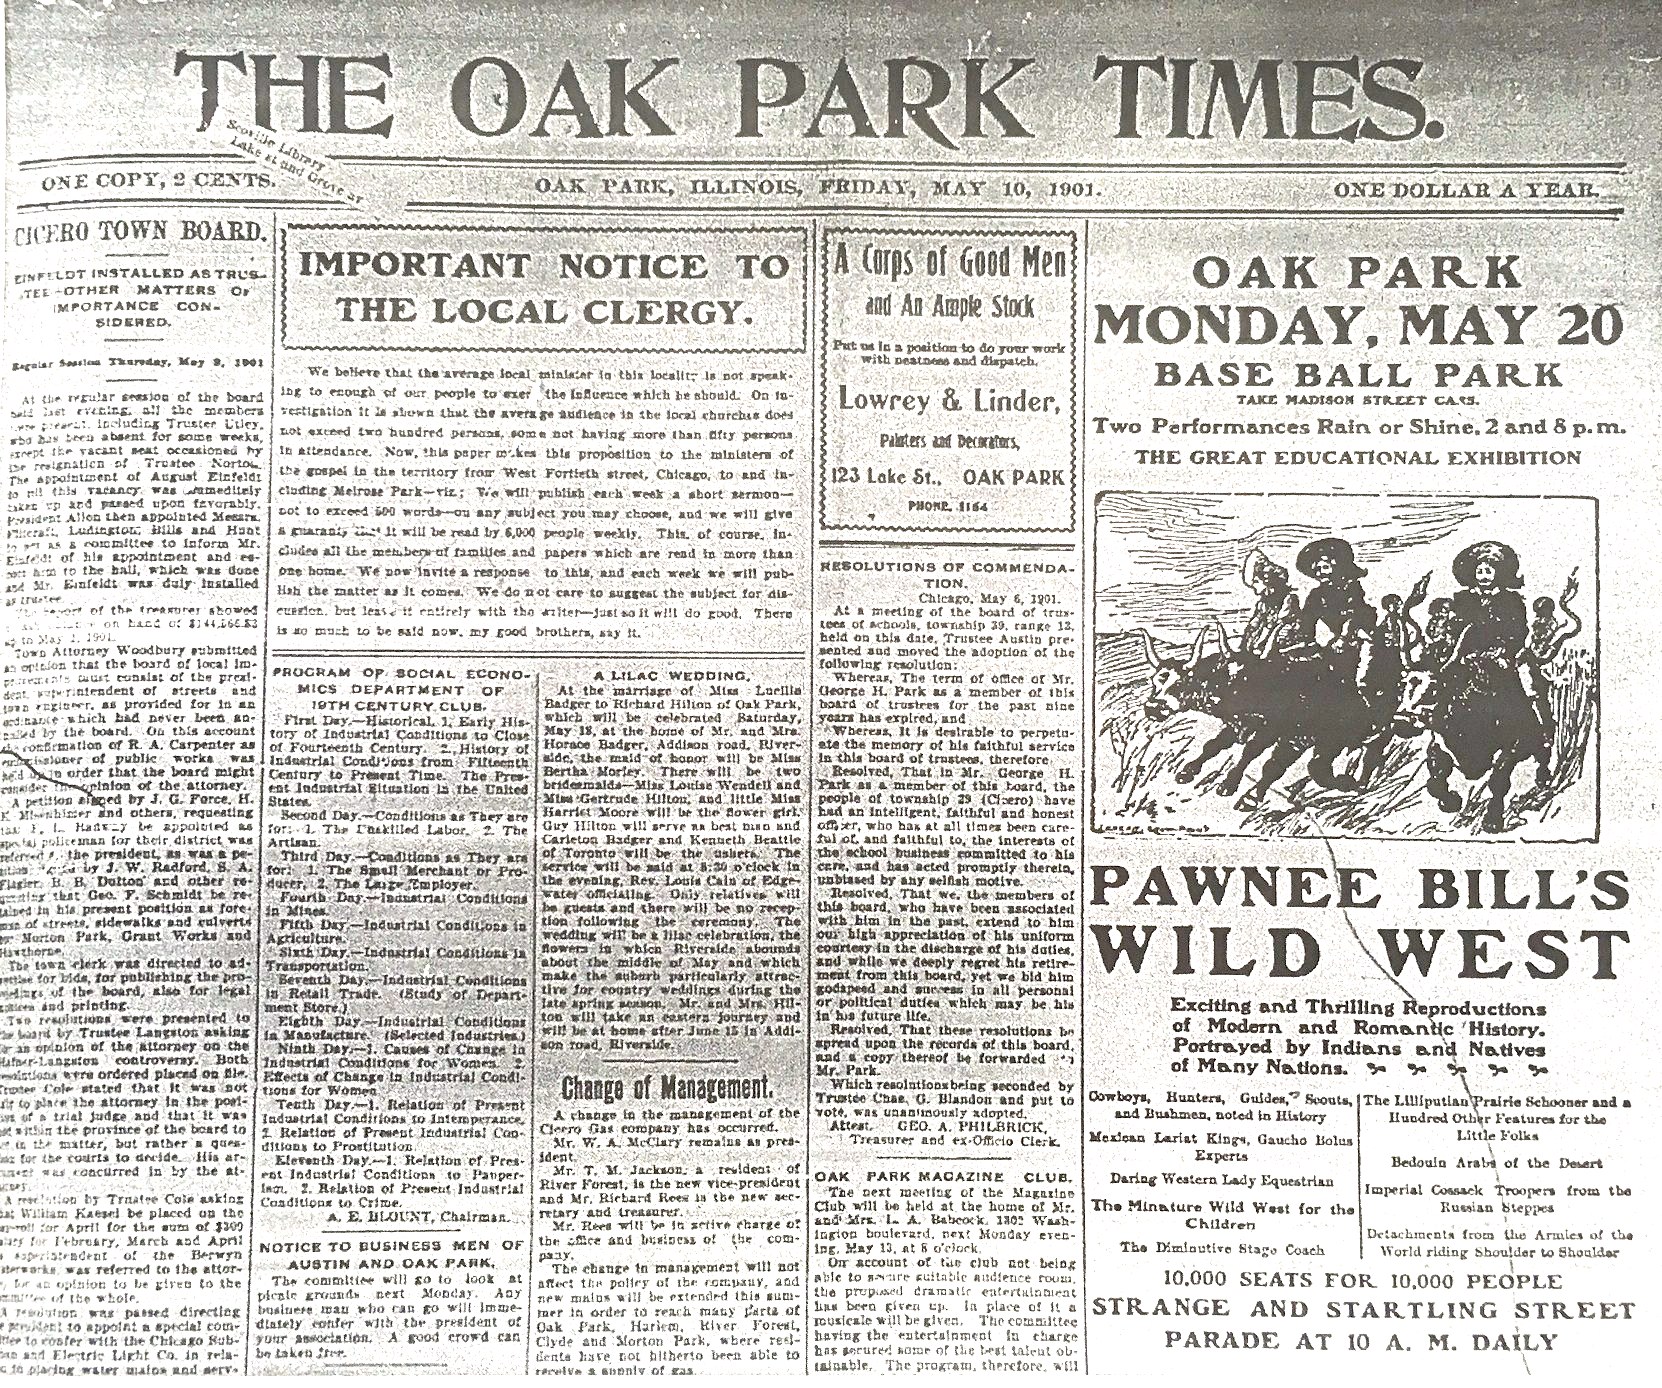 The front page of The Oak Park Times for May 10, 1901.  Pawnee Bill's Wild West show has a double-column advertisement on the right.